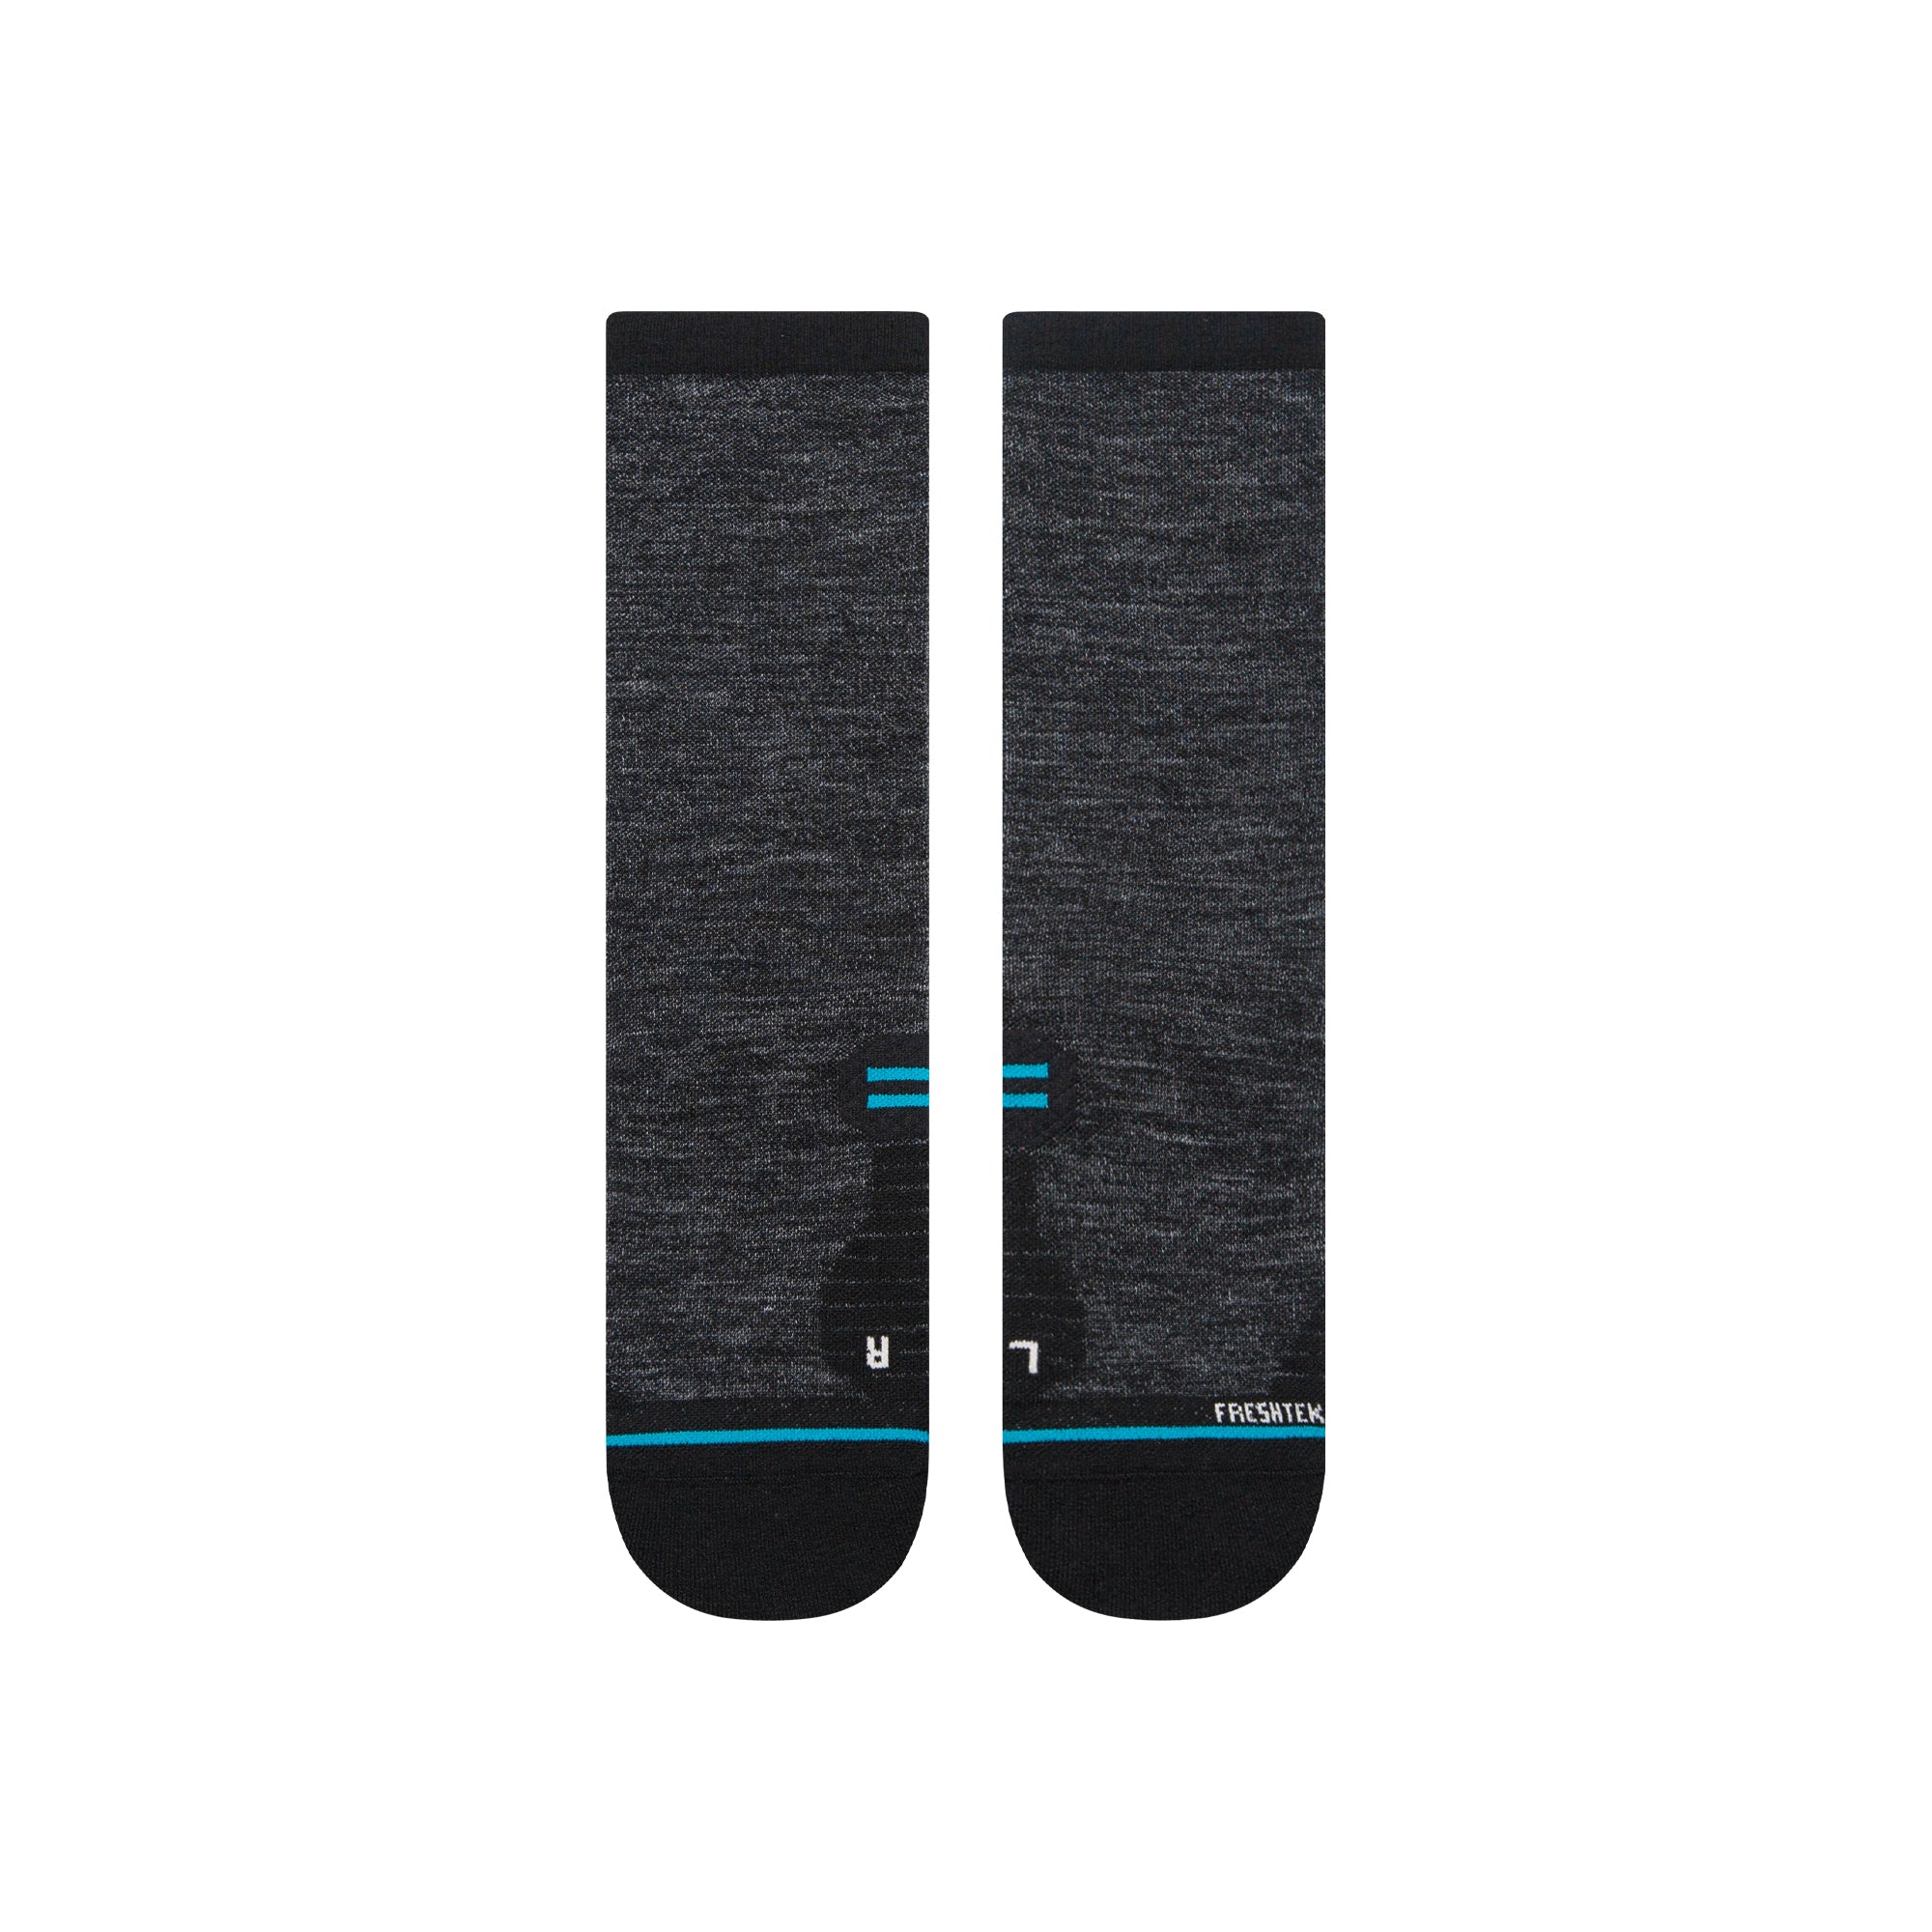 Chaussettes de running ON Homme, Chaussettes de running mi-hautes ON  RUNNING LOW SOCK Black, Shadow pour homme